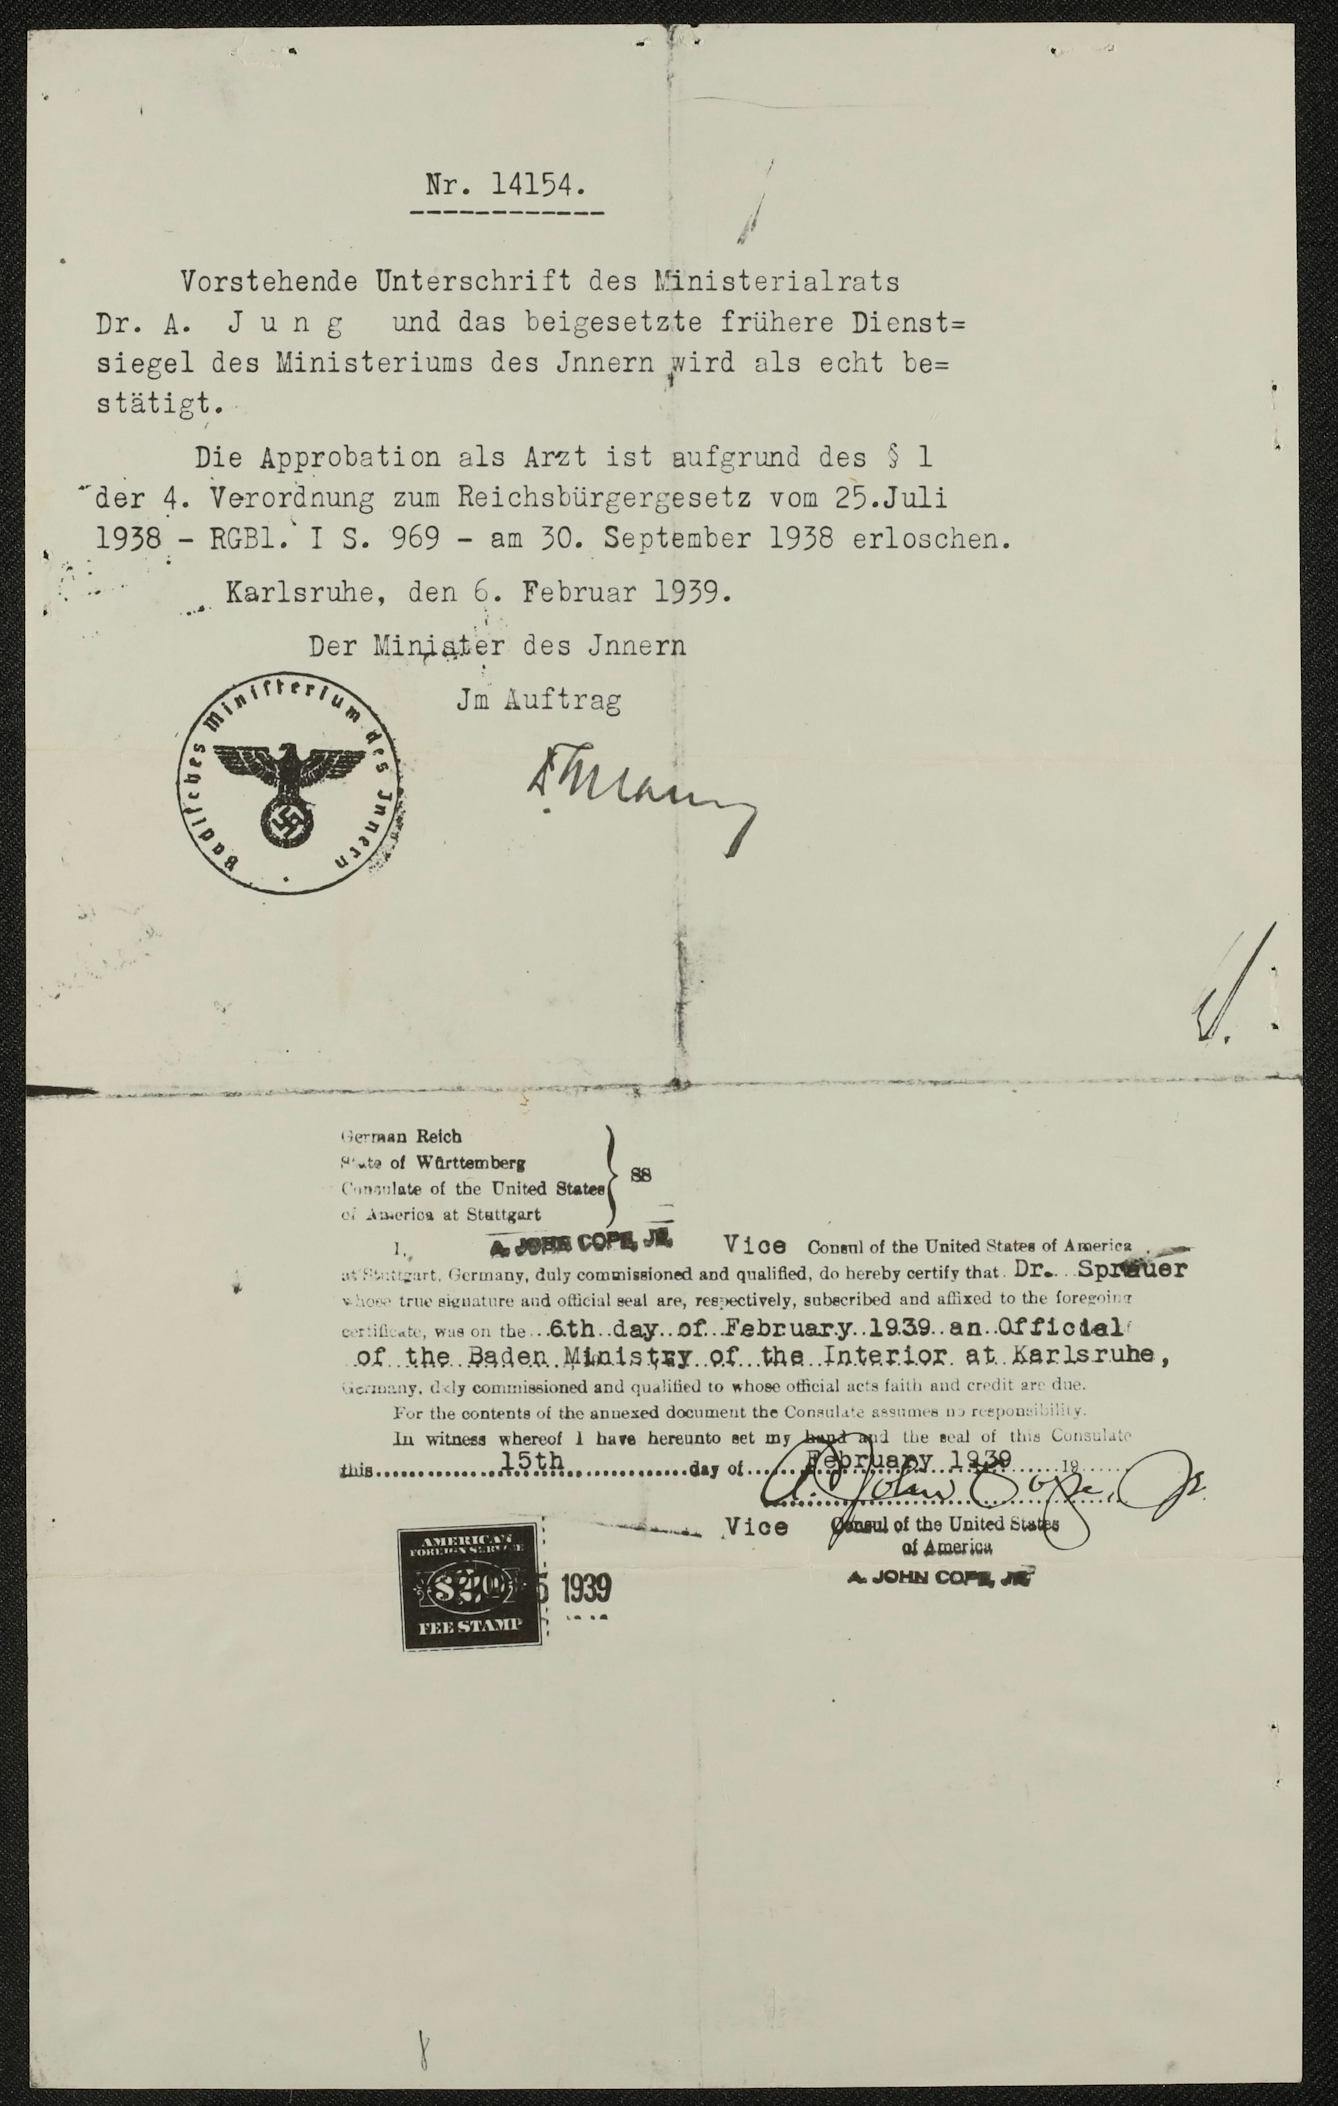 Historic papers showing typewritten words on dull background with fold marks bisecting the paper vertically and horizontally. There are two official stamps on the document, one with the Nazi Reich eagle and swastika, and one with numbers that reads "fee stamp". The contents of the documents are as follows:

Nr. 14154.
Vorstehende Unterschrift des Ministerialrats
Dr. A. Jung und das beigesetzte frühere Dienst=
siegel des Ministeriums des Jnnern wird als echt be=
stätigt.
Die Approbation als Arzt ist aufgrund des § 1
der 4. Verordnung zum Reichsbürgergesetz vom 25.Juli
1938 - RGB1. I S. 969 - am 30. September 1938 erloschen.
Karlsruhe, den 6. Februar 1939.
Der Minister des Jnnern
Jm Auftrag


German Reich
State of Wurttemberg
Consulate of the United States of America at Stuttgart

I, A. John Cope, Jr., Vice Consul of the United States of America at Stuttgart, German, duly commissioned and qualified, do hereby certify that Dr Sprauer, whose true signature and official seal are, respectively, subscribed and affixed to the foregoing certificate, was on the 6th day of February 1939 an Official of the Baden Ministry of the Interior at Karlsruhe, Germany, duly commissioned and qualified to whose official acts and faith and credit are due.
For the contents of the annexed document to the Consulate assumes no responsibility.
In witness whereof I have hereunto set my hand and the deal of this Consulate this 15th day of February 1939.
Vice Consul of the United States
of America
A. John Cope, Jr.